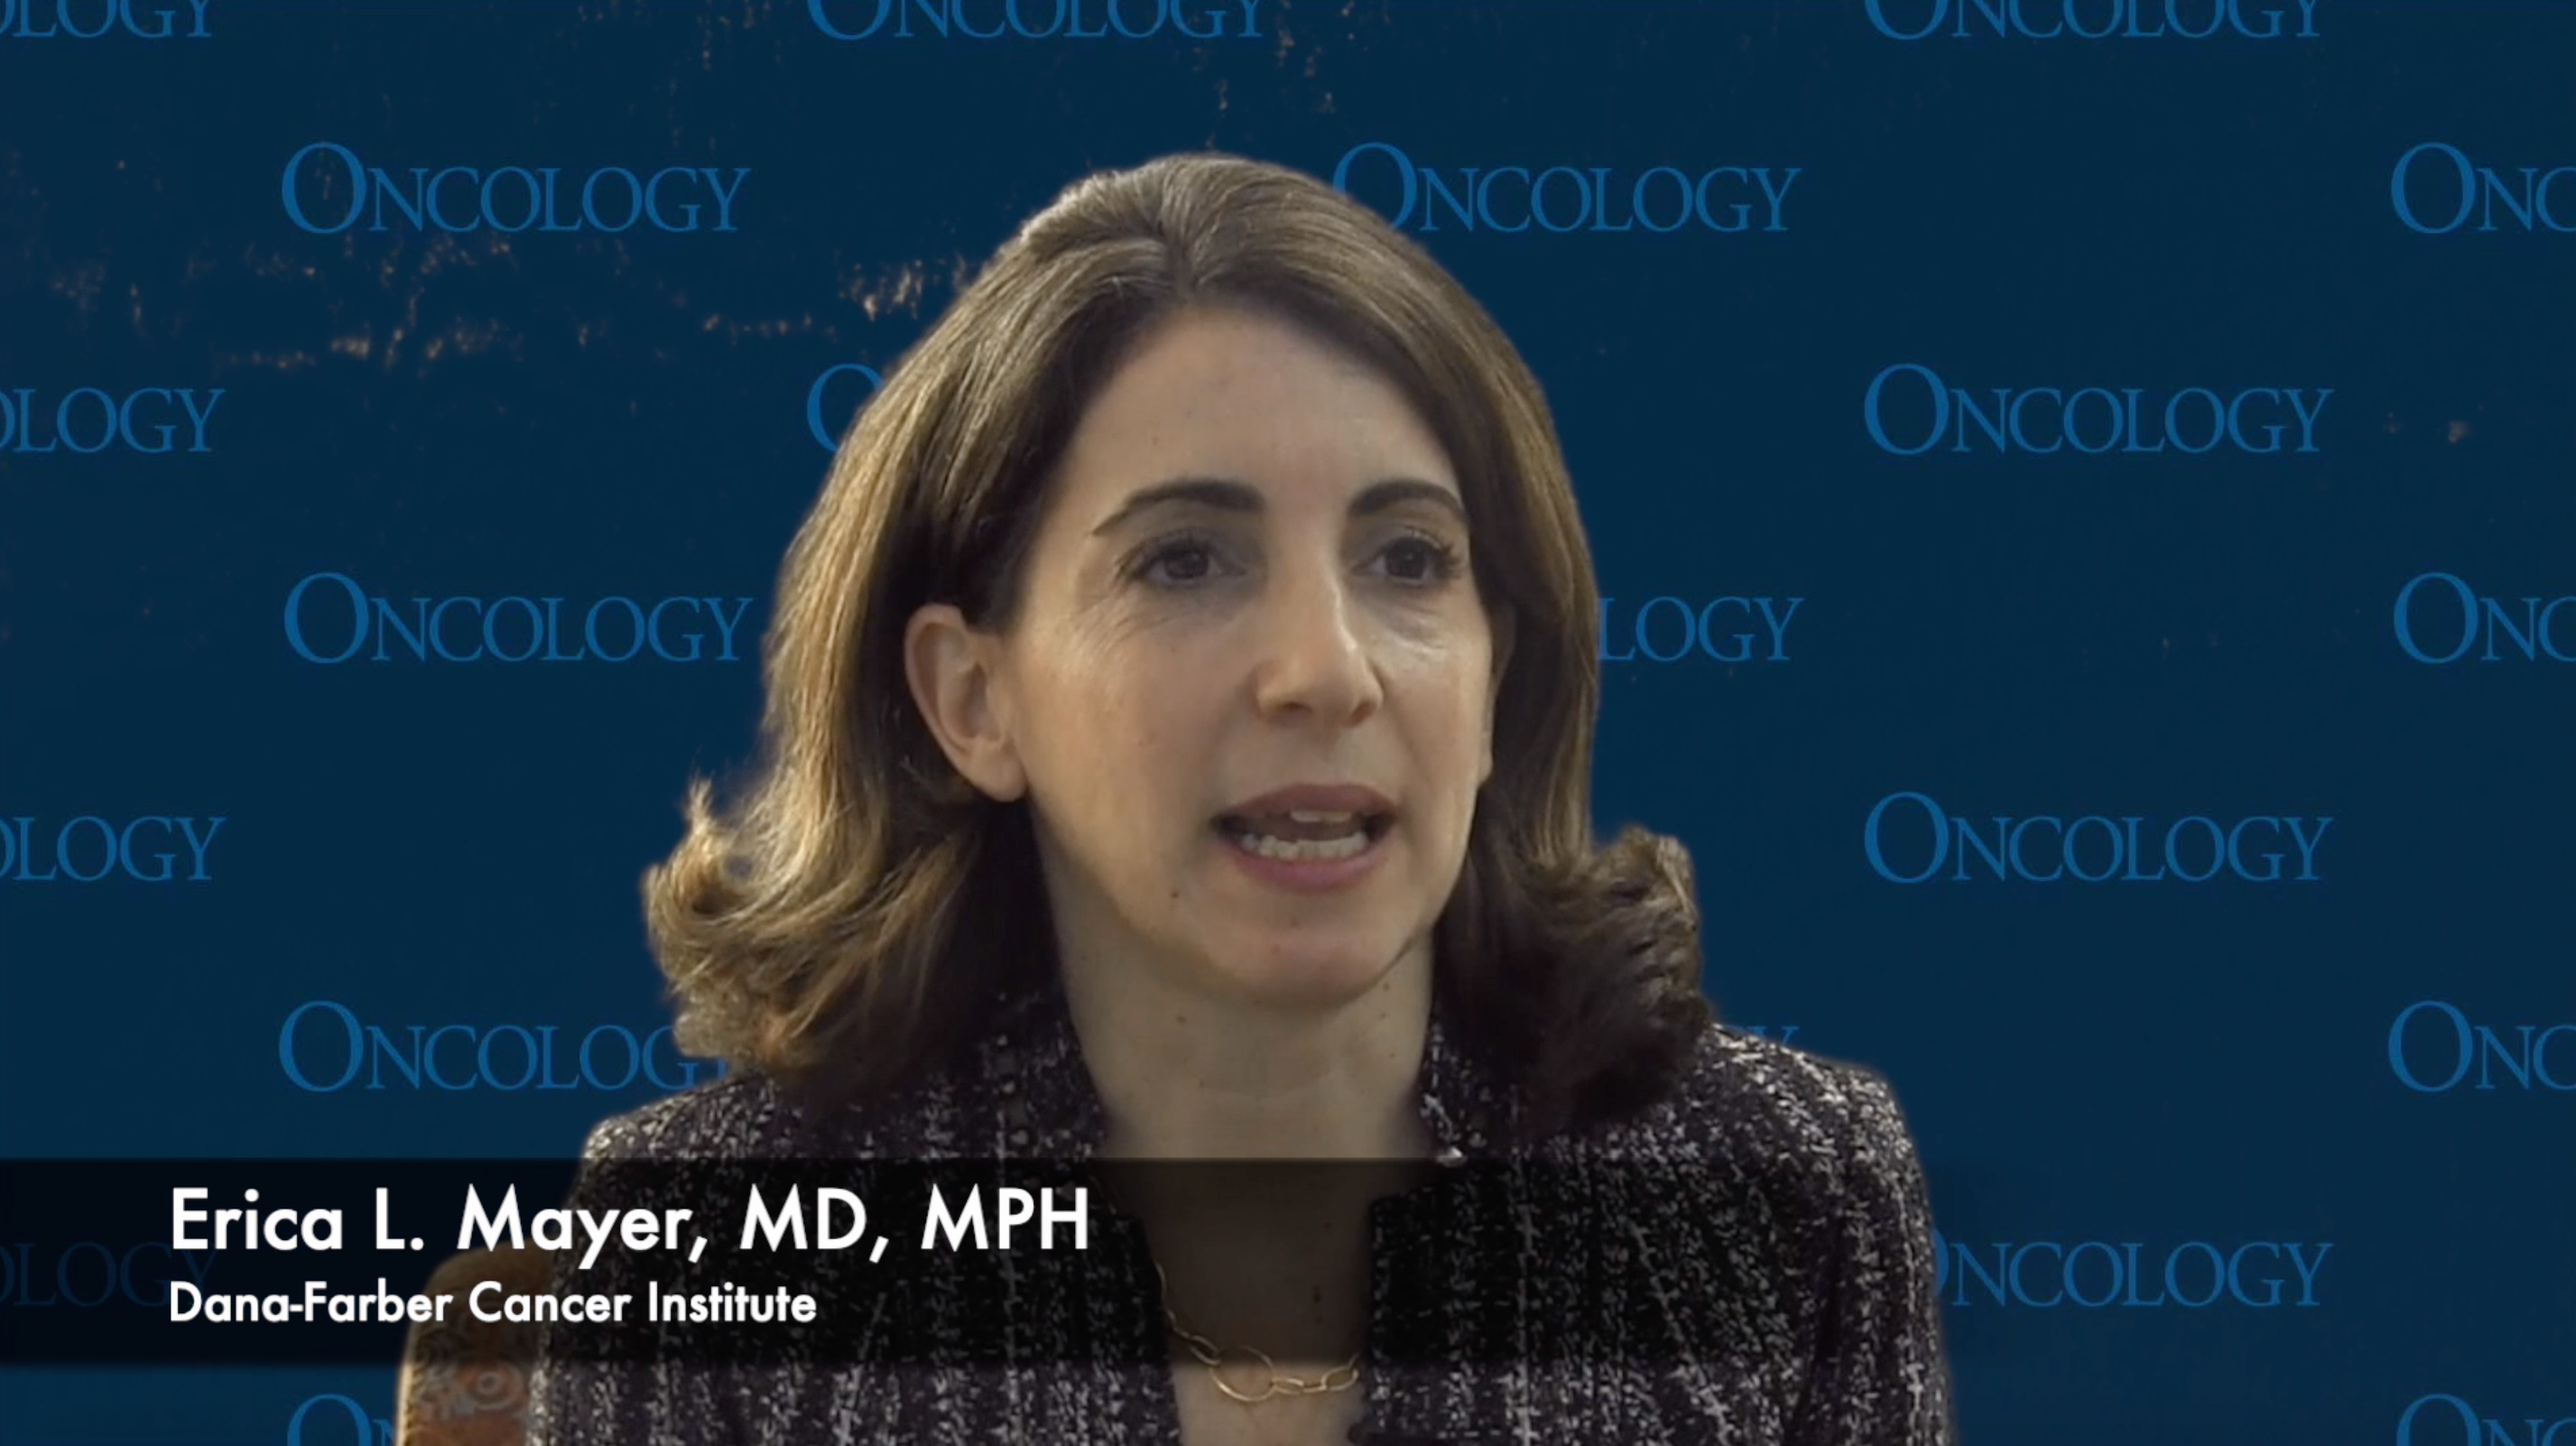 Erica L. Mayer, MD, MPH, Discusses New Targeted Therapies in Breast Cancer Treatment